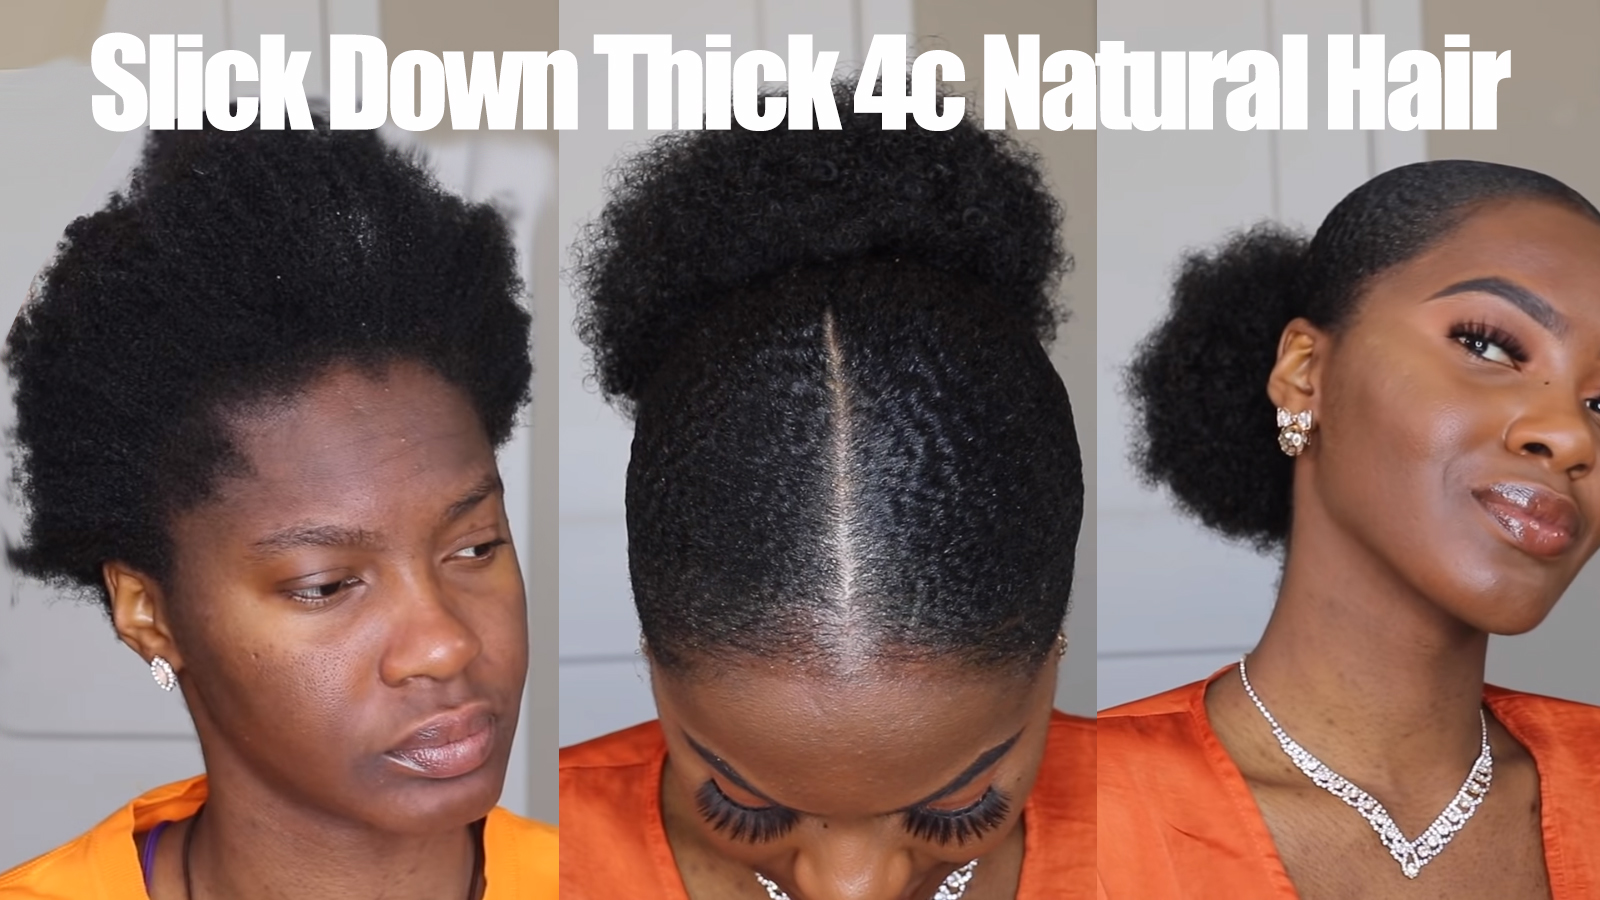 How Adanna Slicks Down Her Sister's Thick 4C Natural Hair...The Style Looks  Amazing ⋆ African American Hairstyle Videos - AAHV